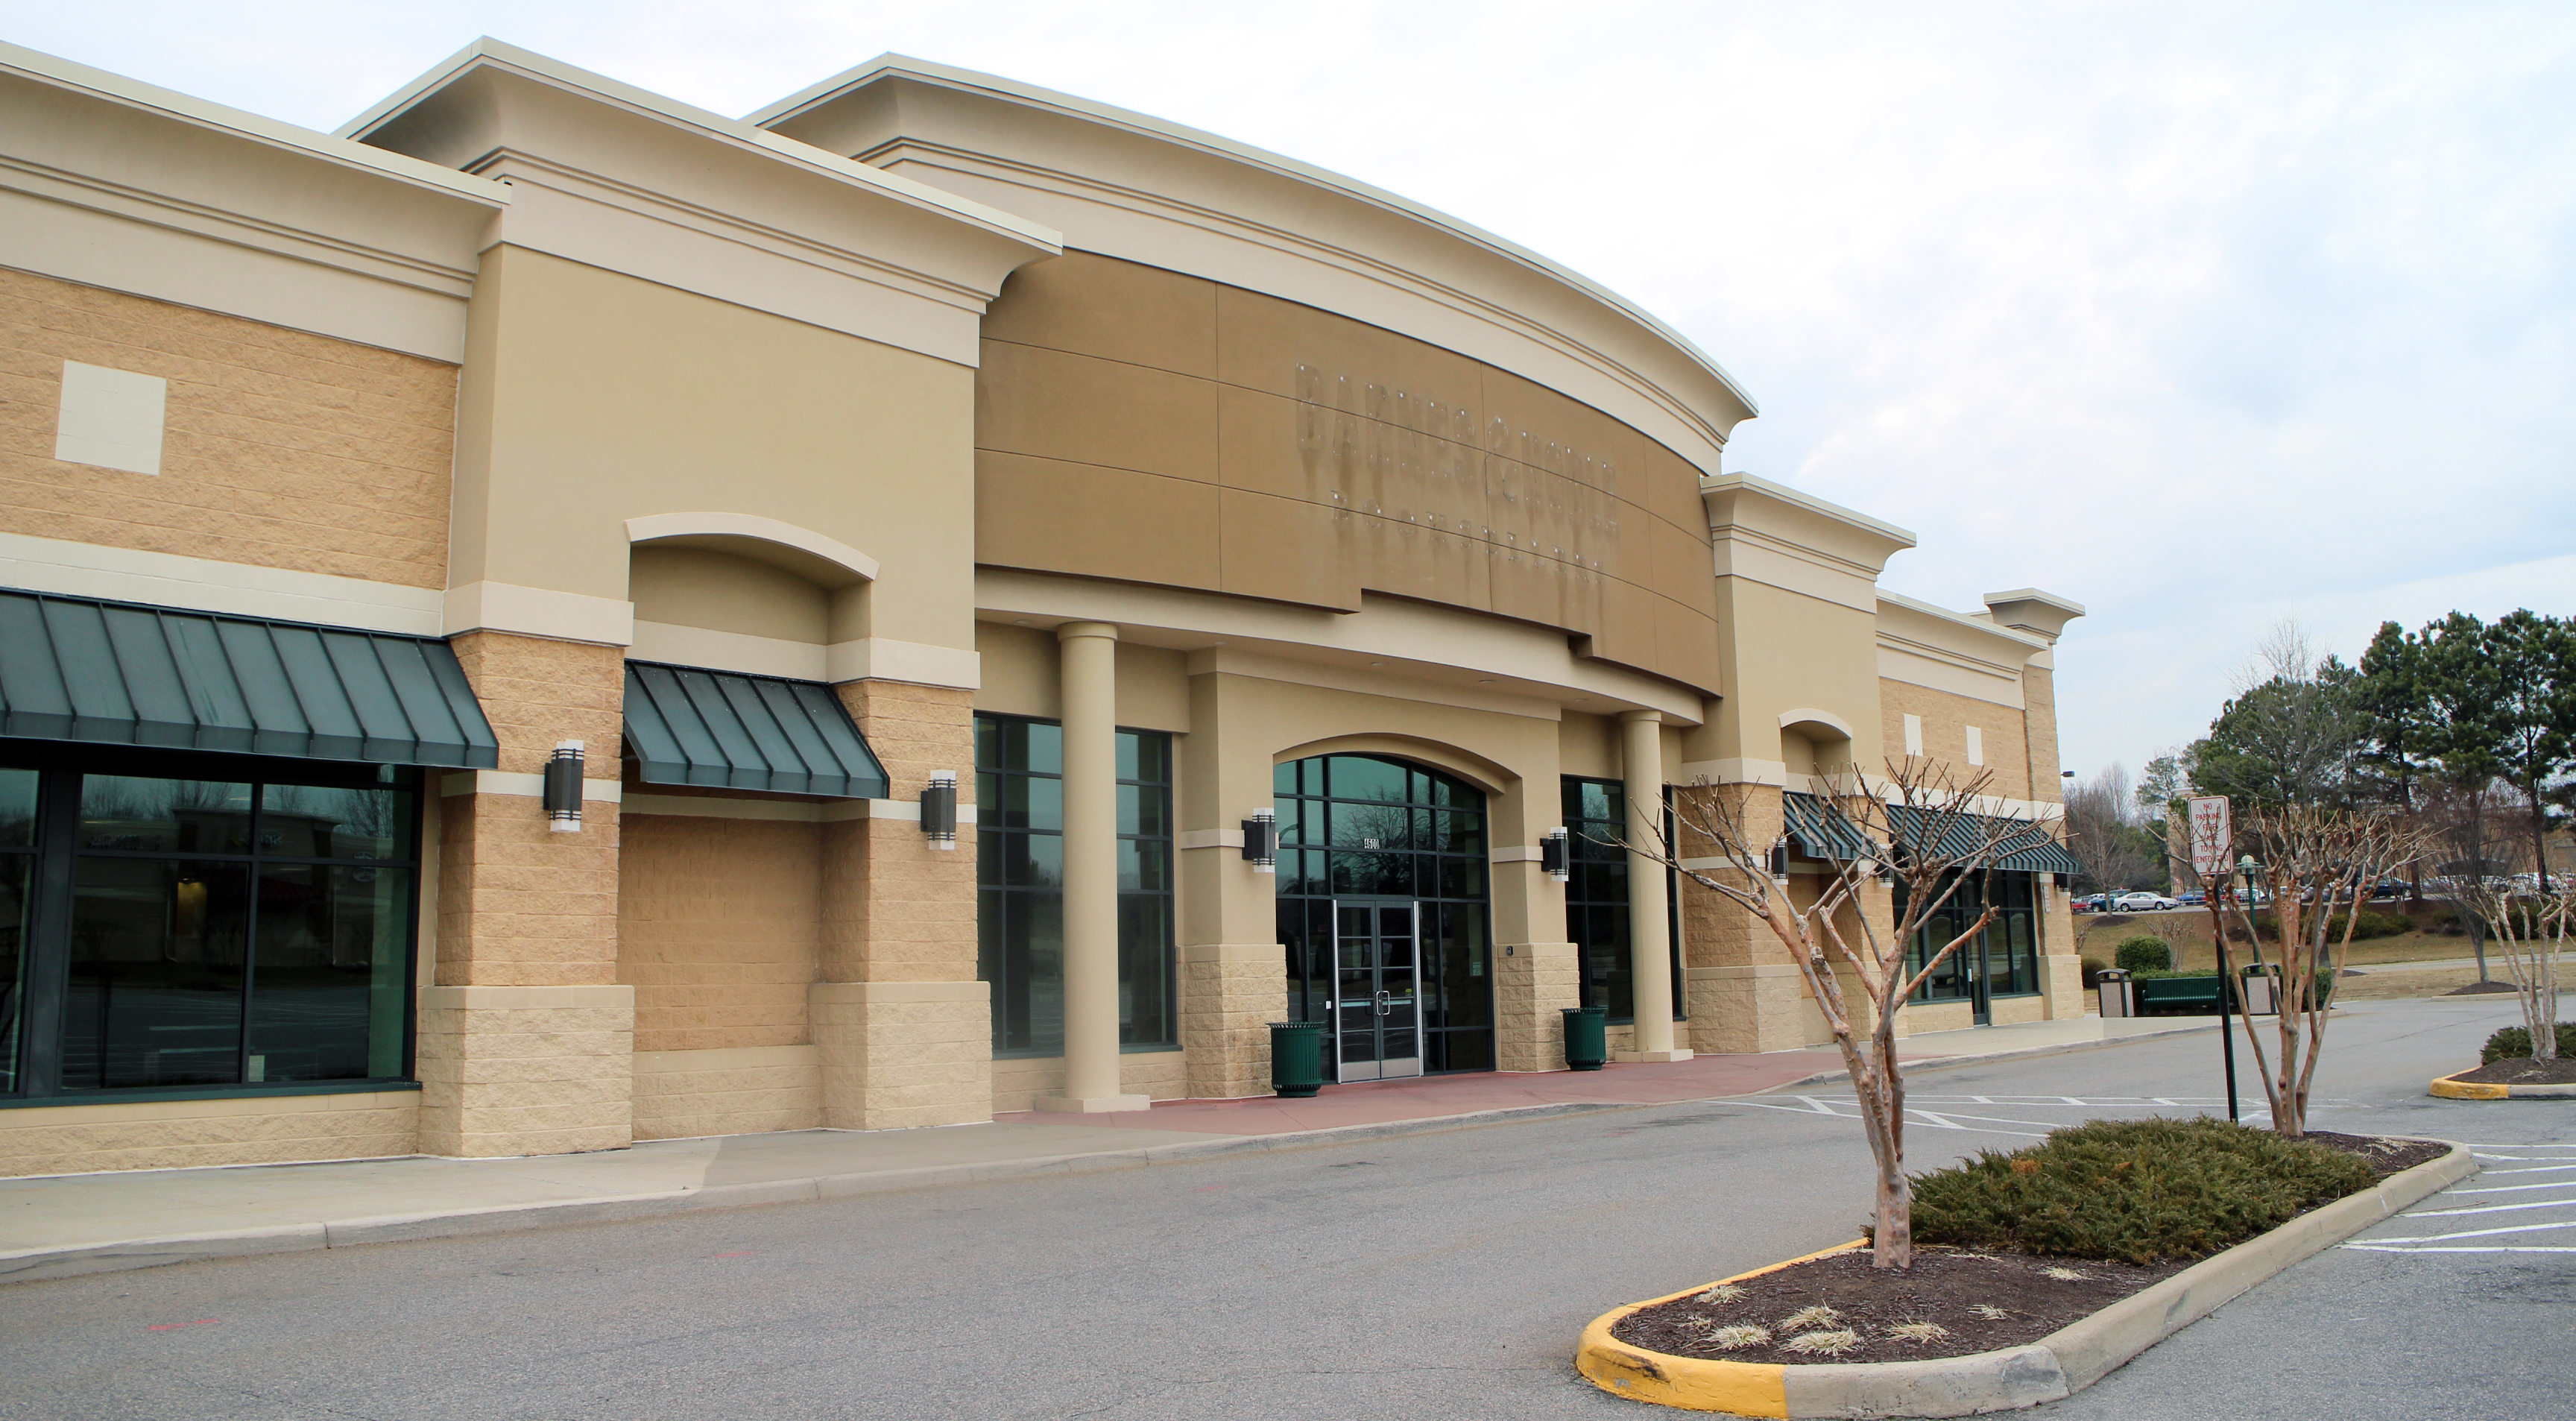 Grocer scoops up fresh real estate in Chesterfield ...